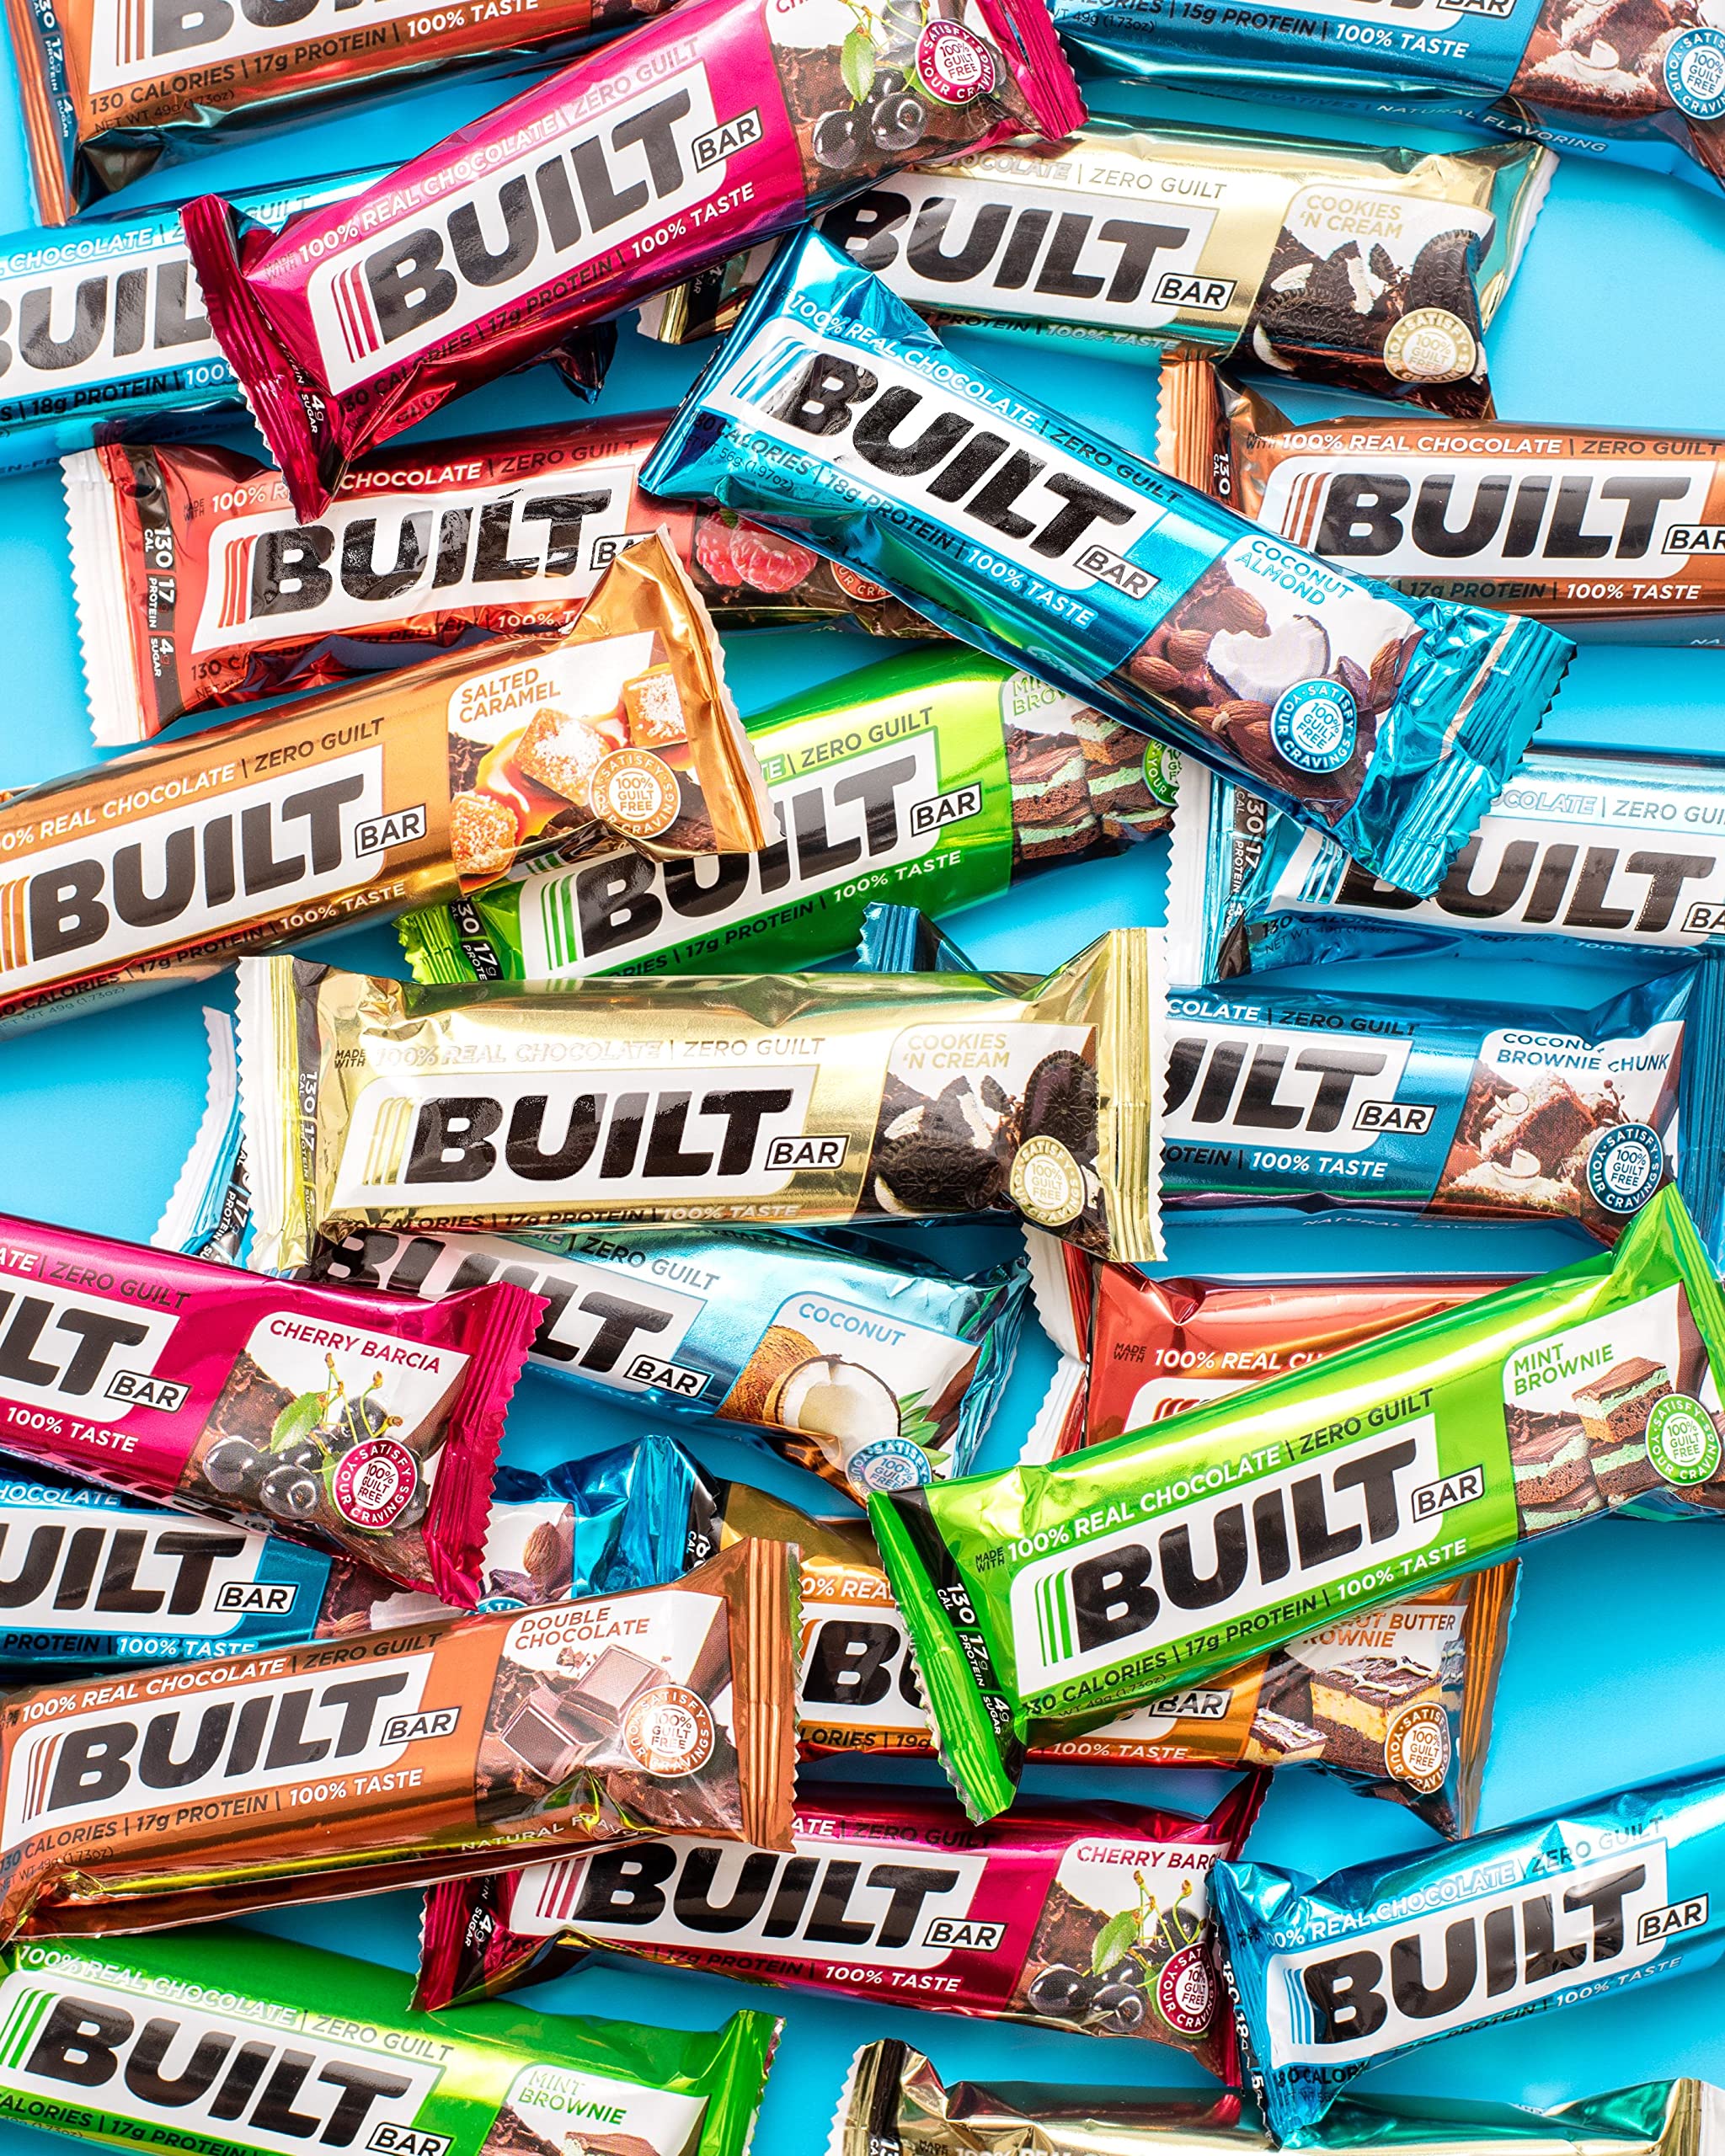 Built Bar 12 Pack High Protein and Energy Bars - Low Carb, Low Calorie, Low Sugar - Covered in 100% Real Chocolate - Delicious, Healthy Snack - (Cookie Dough Chunk Puff)